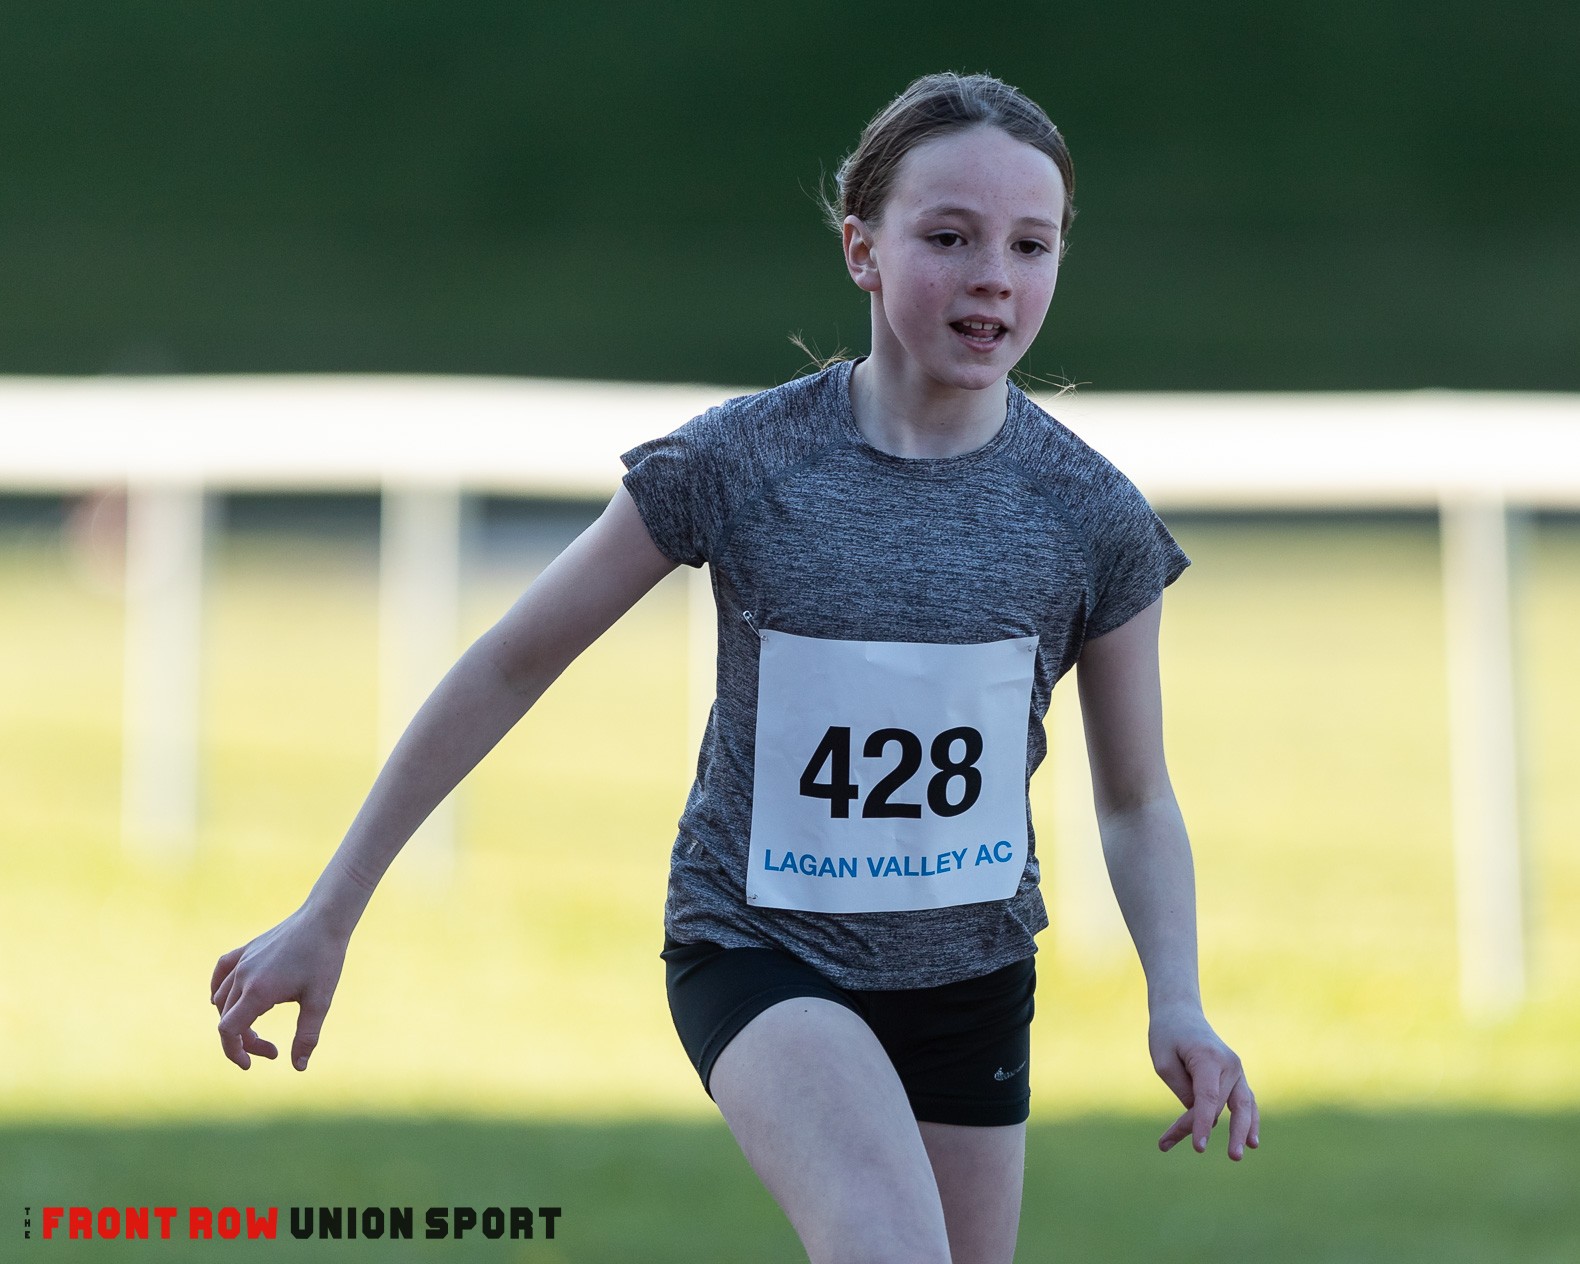 The Front Row Union Sport - Fab 5 Series: Lagan Valley AC Meeting 2